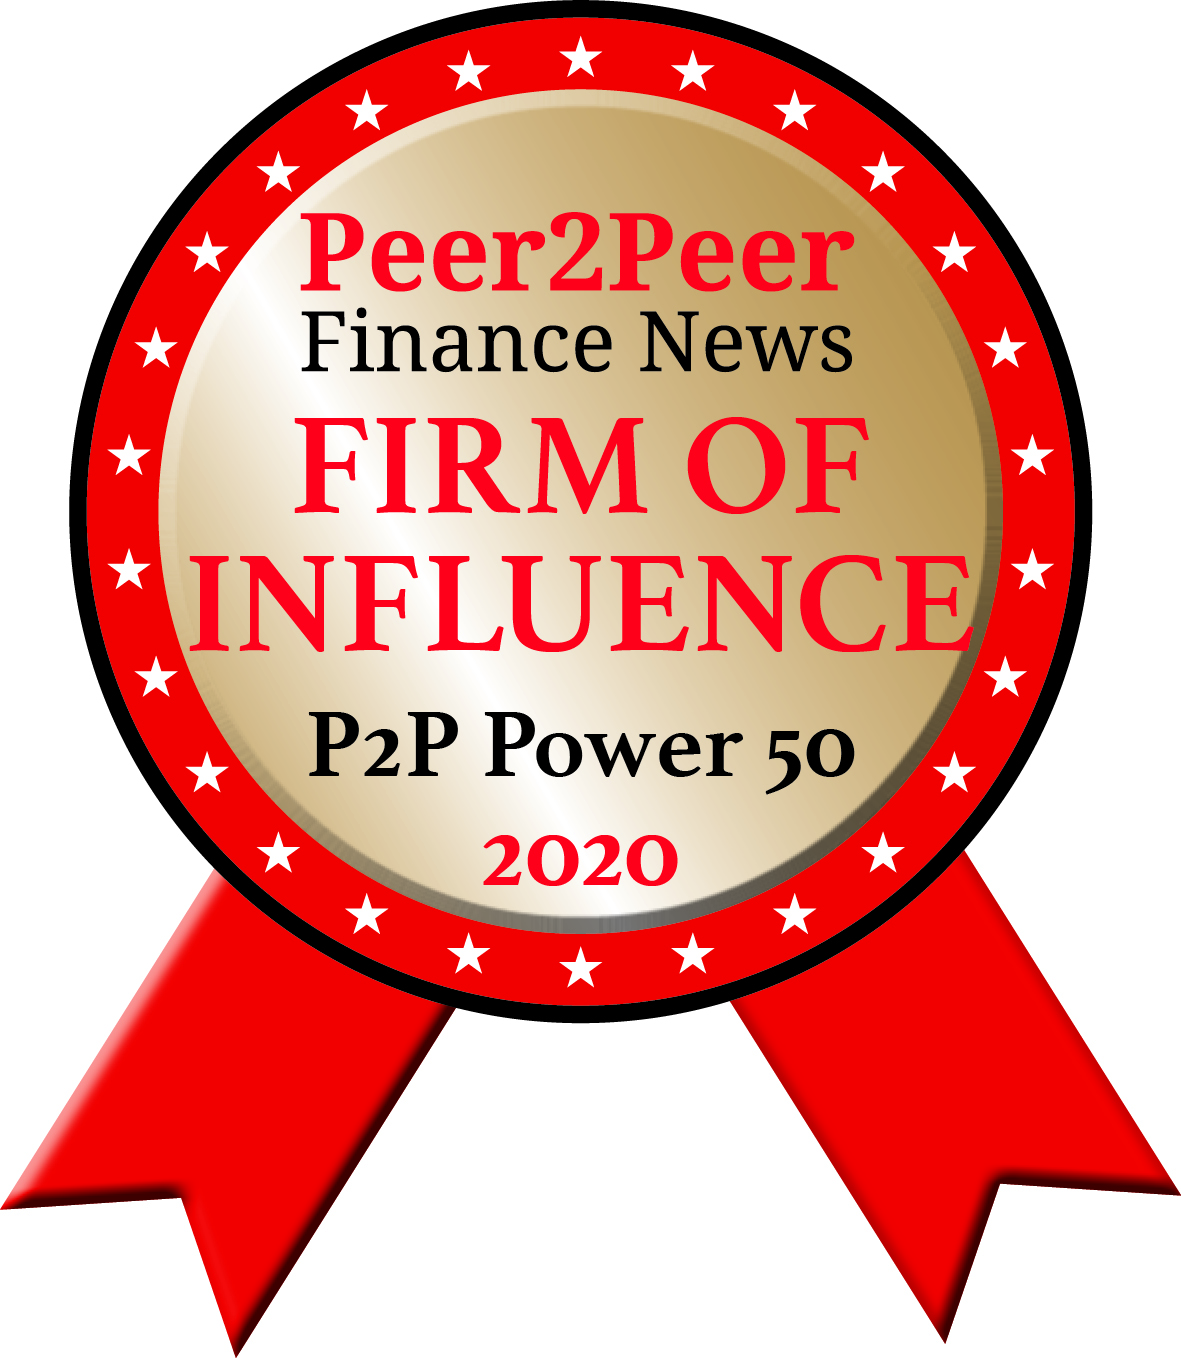 Image showing Quantuma are an accredited Peer2Peer firm of influence